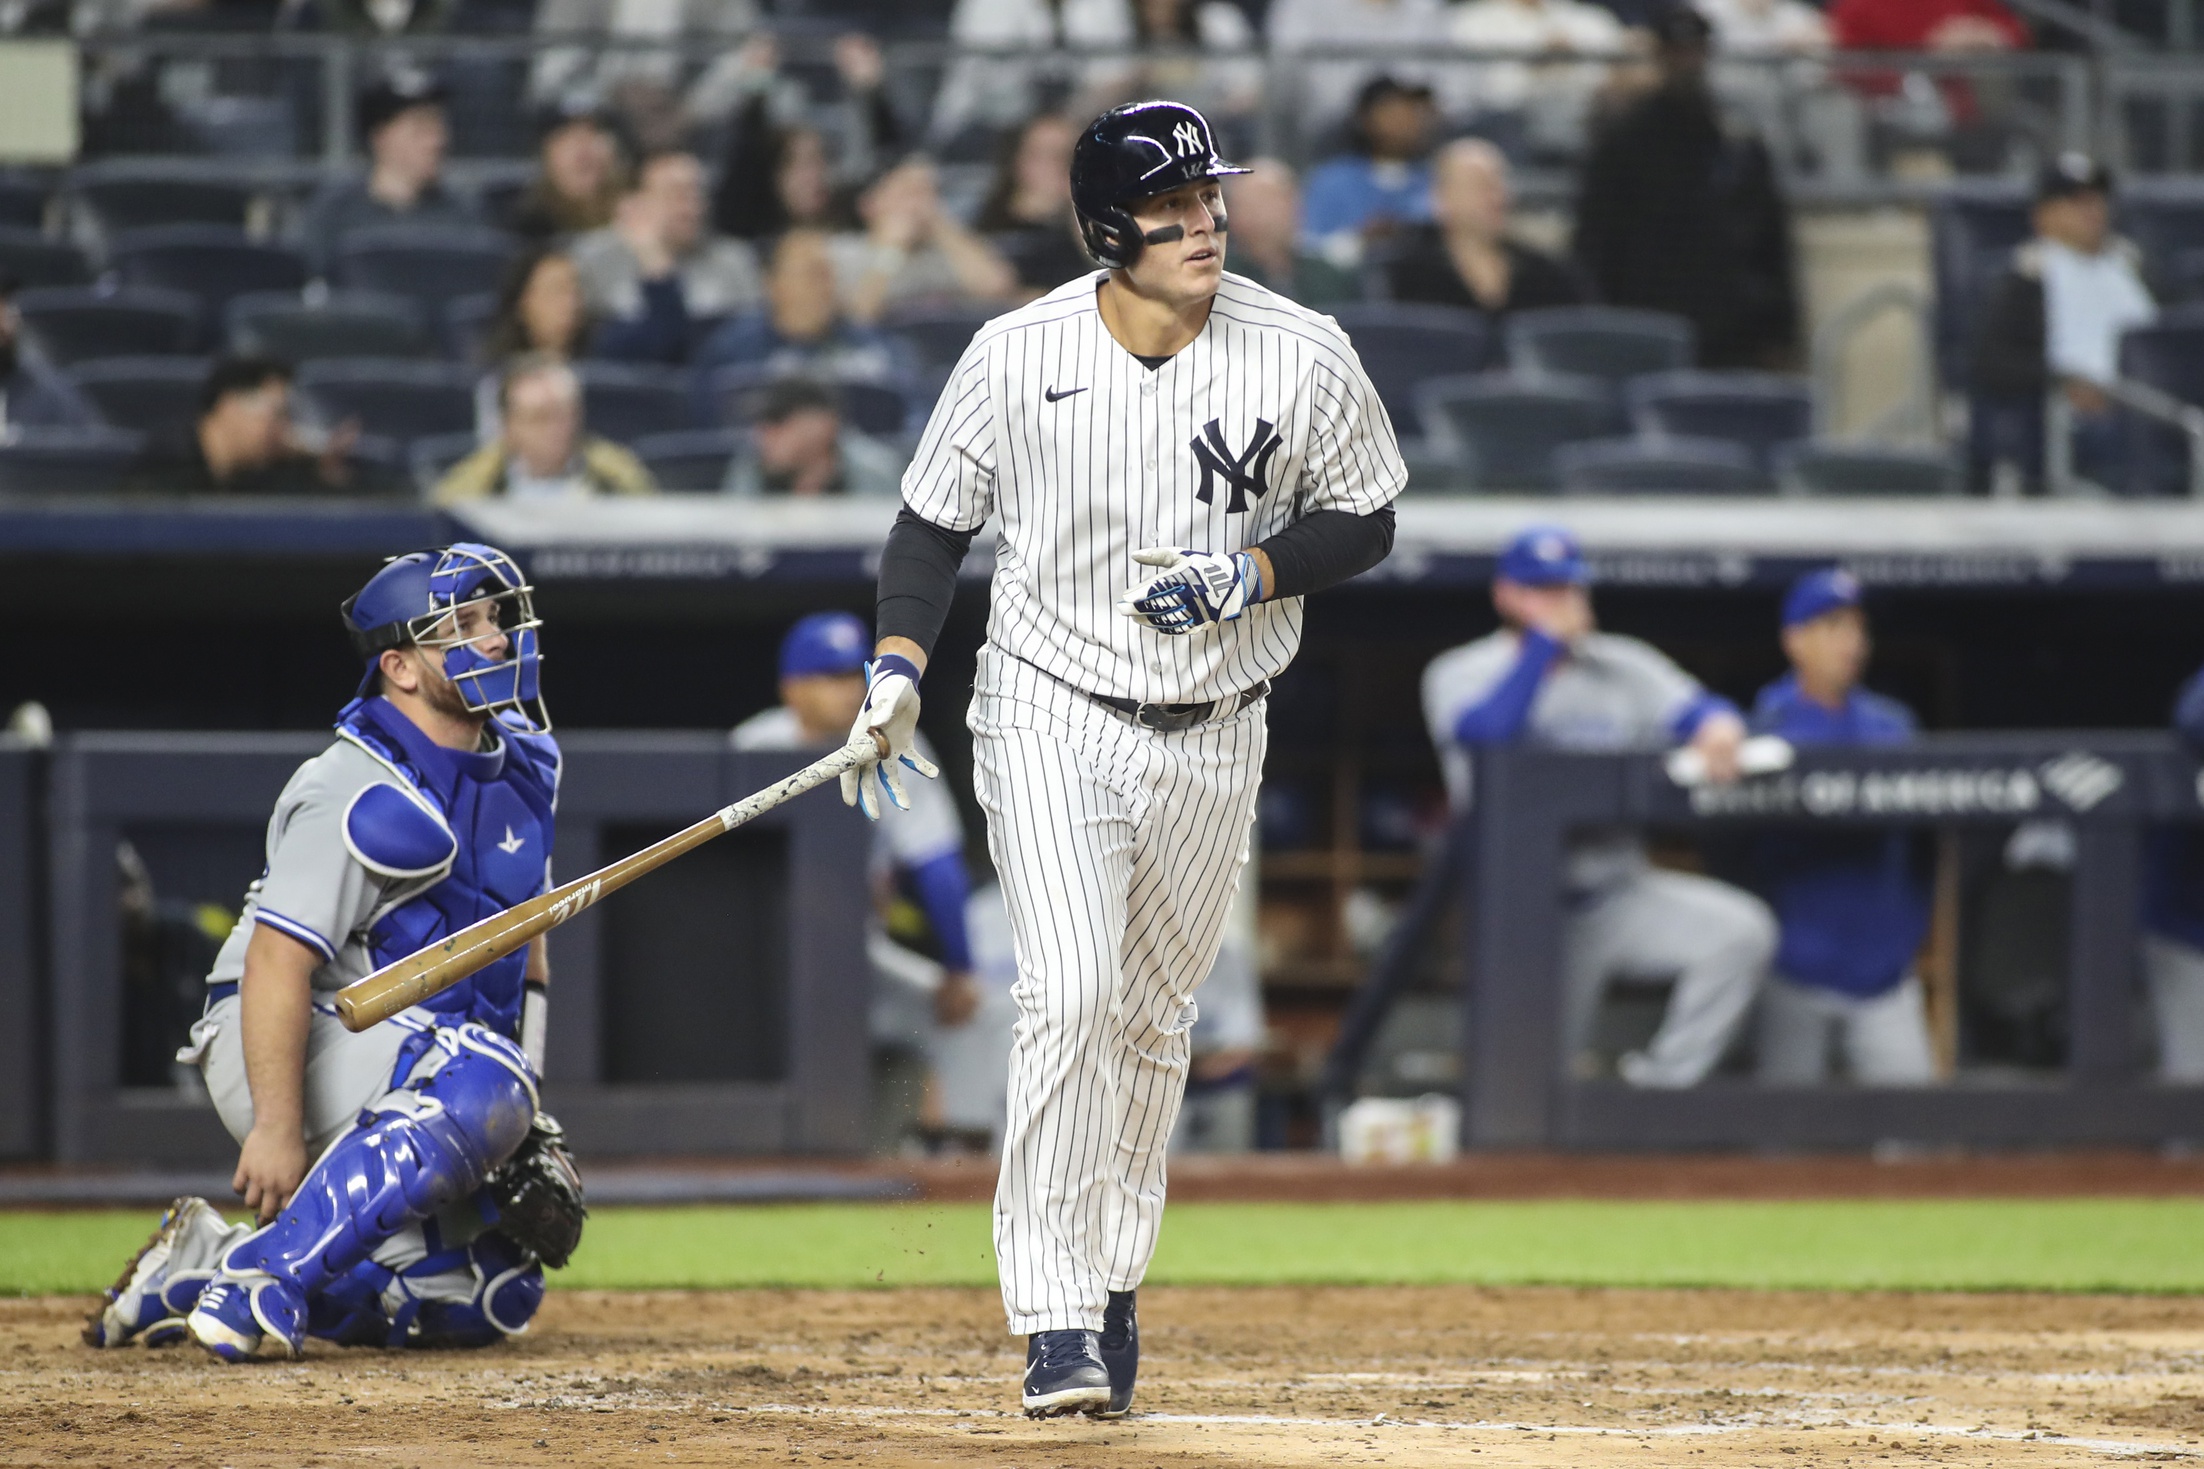 New York Yankees Signing 1B Anthony Rizzo Is Paying Off So Far This Season  - Sports Illustrated NY Yankees News, Analysis and More